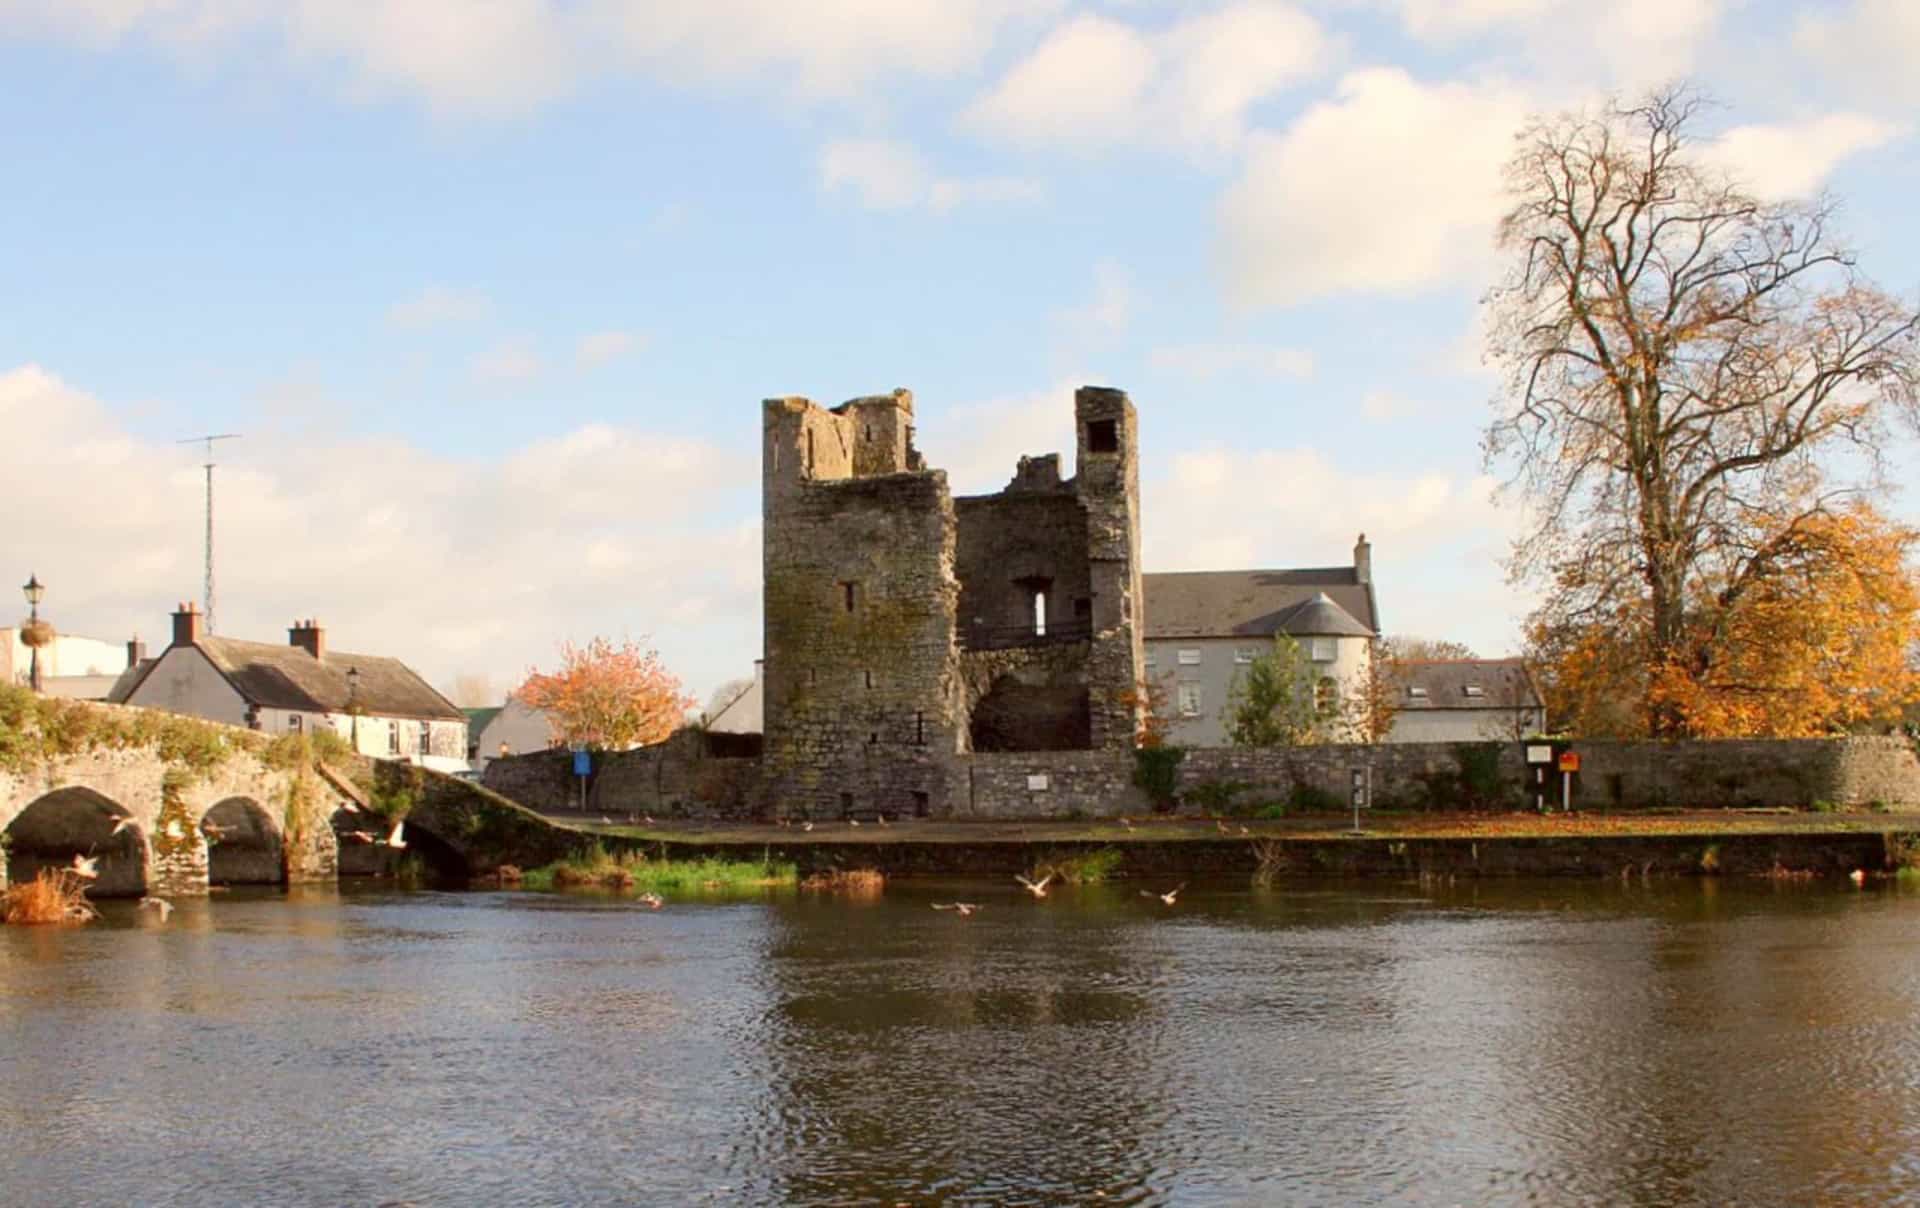 <p>The ruins of the landmark Black Castle, one of Ireland's earliest Norman strongholds, loom over the Barrow river and serve as a reminder of Leighlinbridge's past as a military center for all of Leinster province.</p>